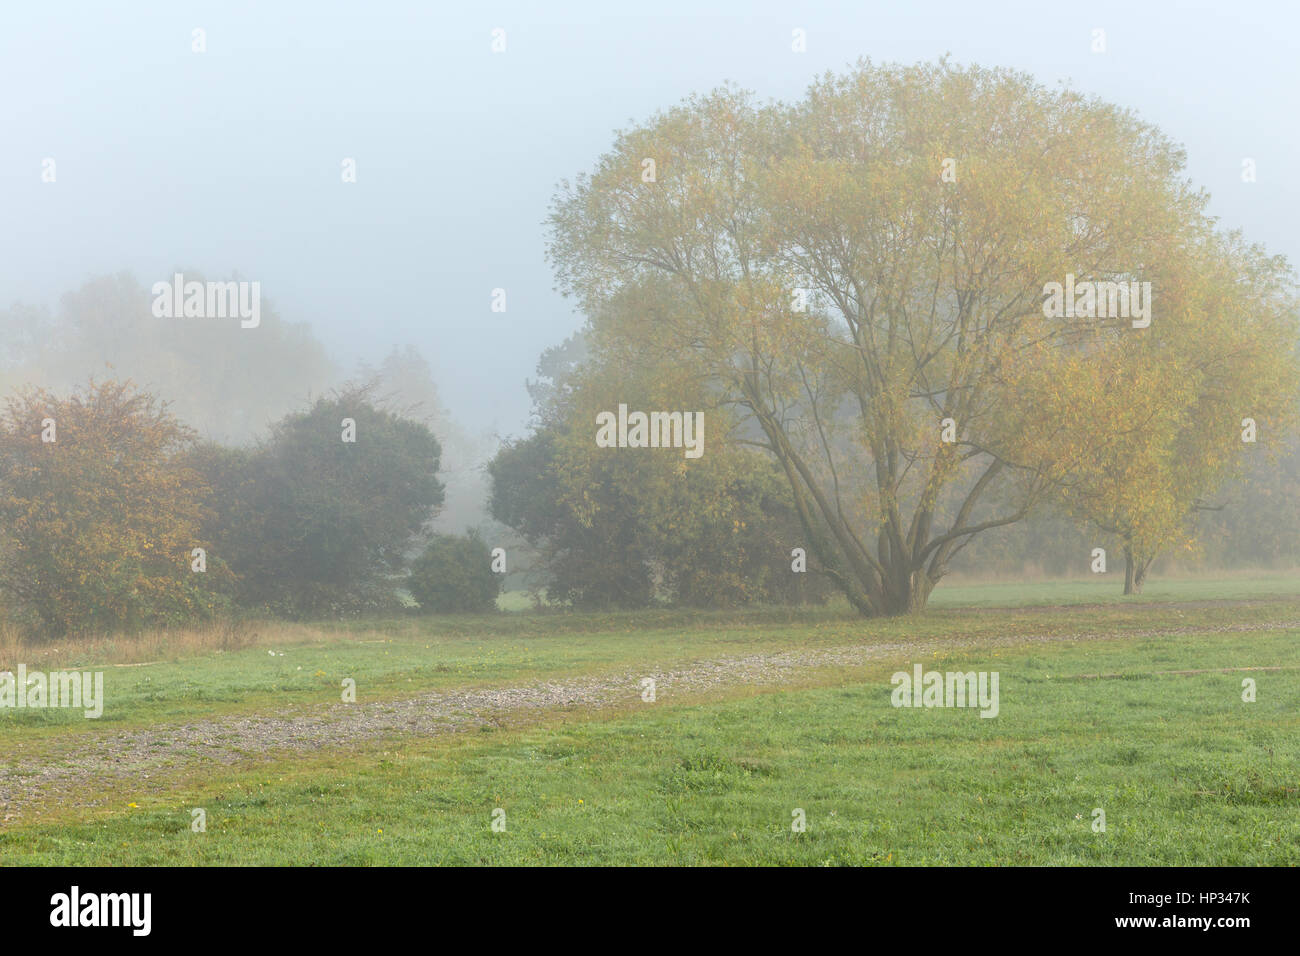 Foggy day Fall shot, simple and moody of just grass and trees with the fog shrouding the background. Stock Photo